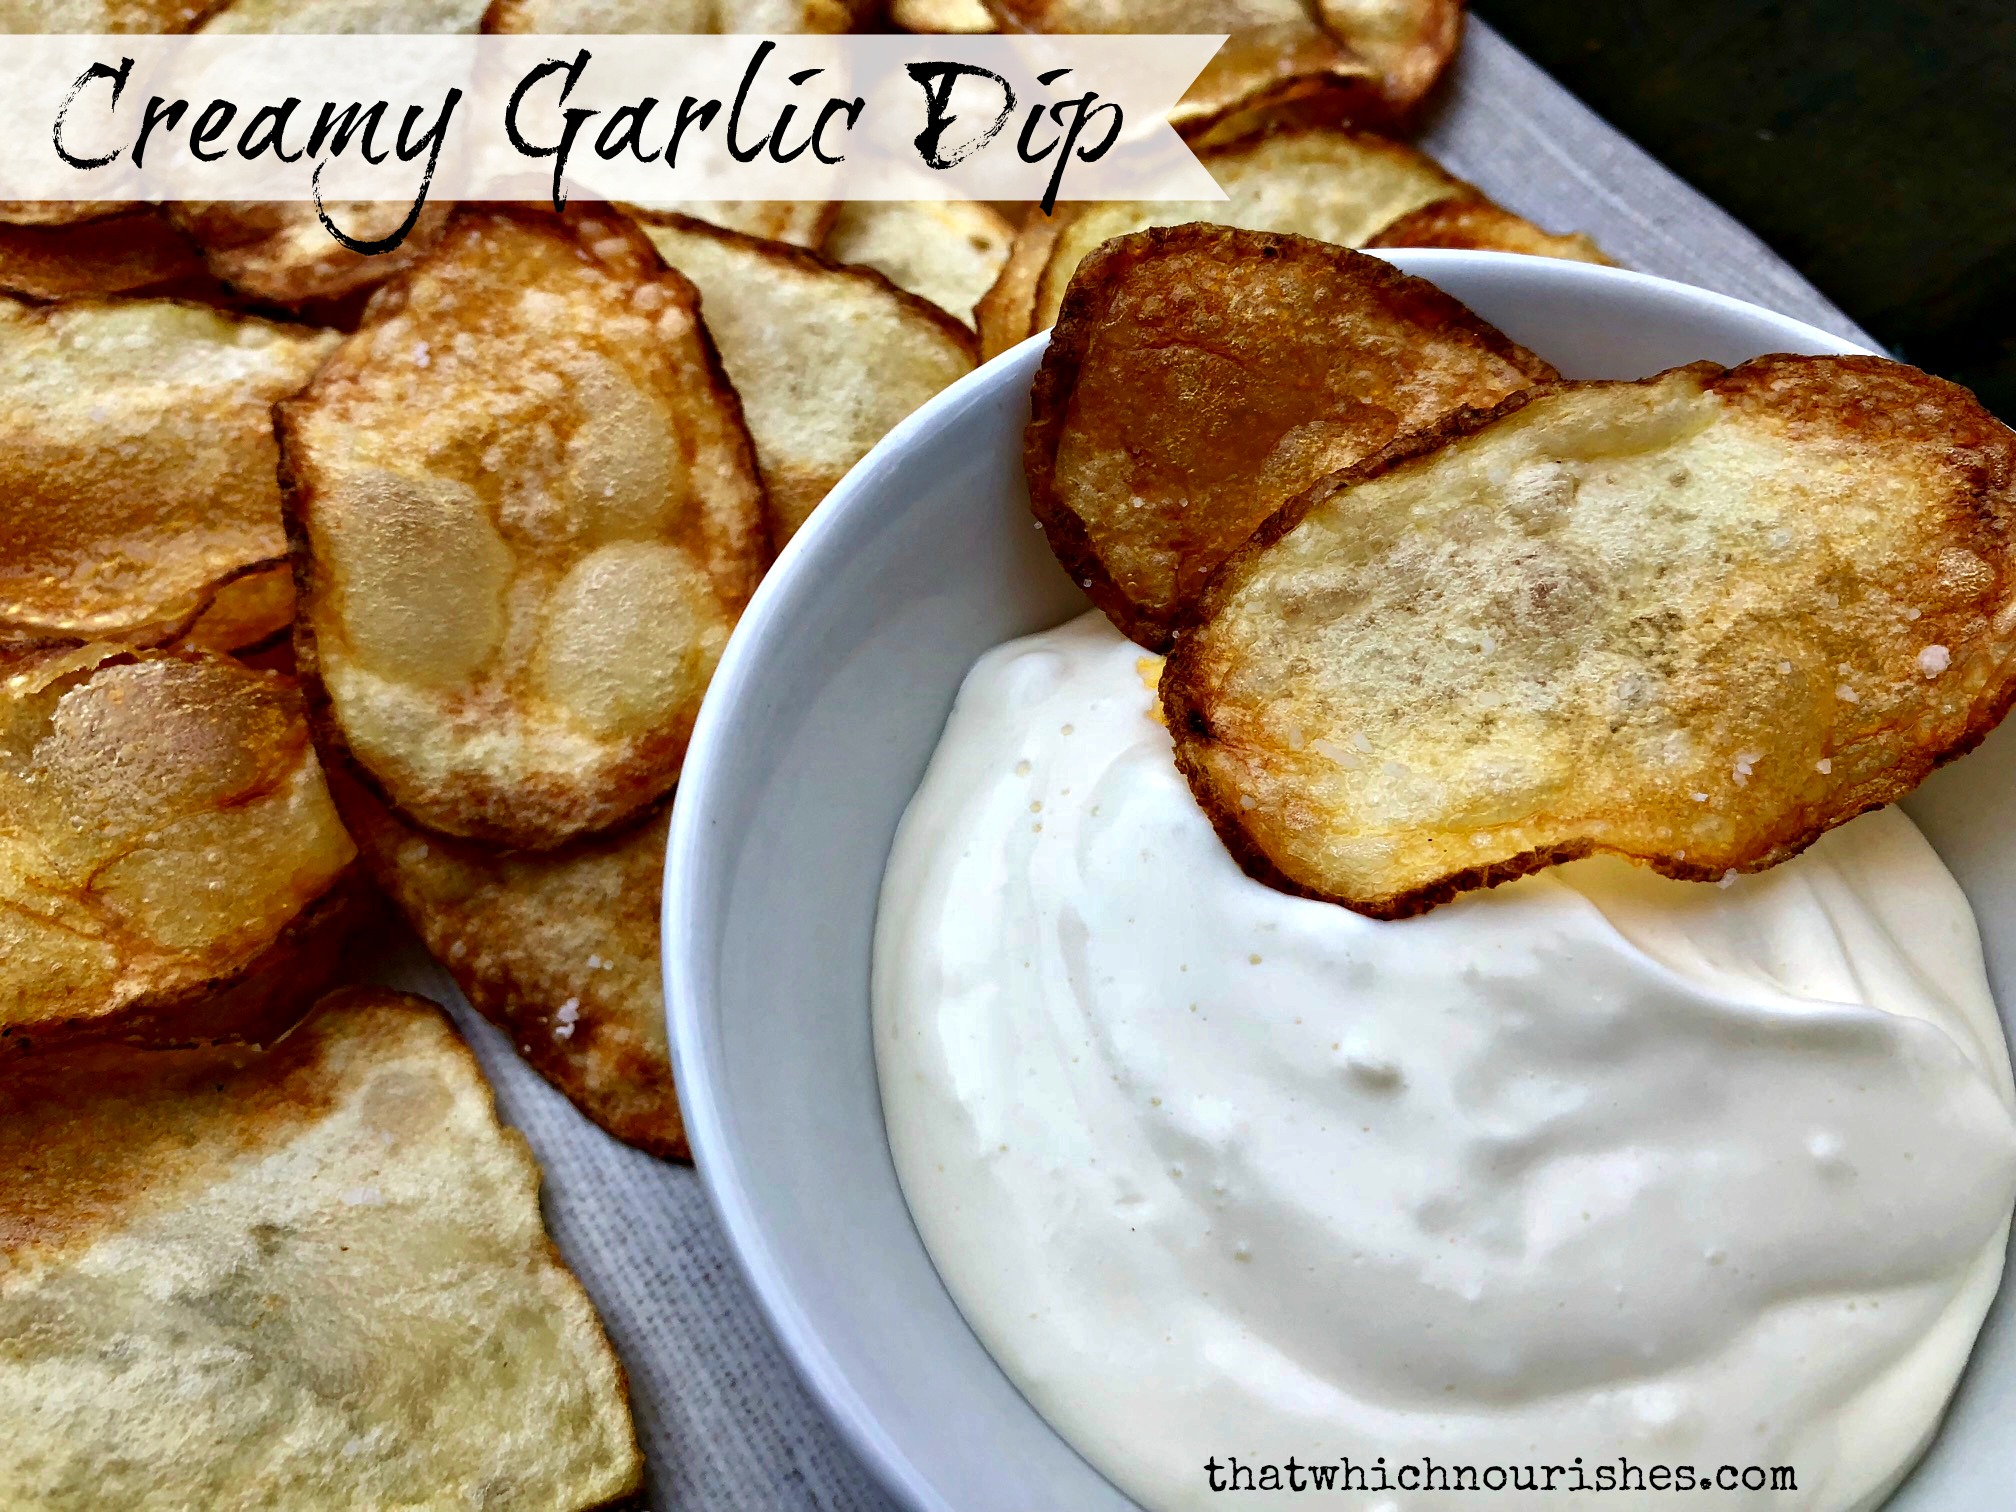 Creamy Garlic Dip -- Perfect in its simplicity, this three ingredient dip is classy and delicious. | thatwhichnourishes.com